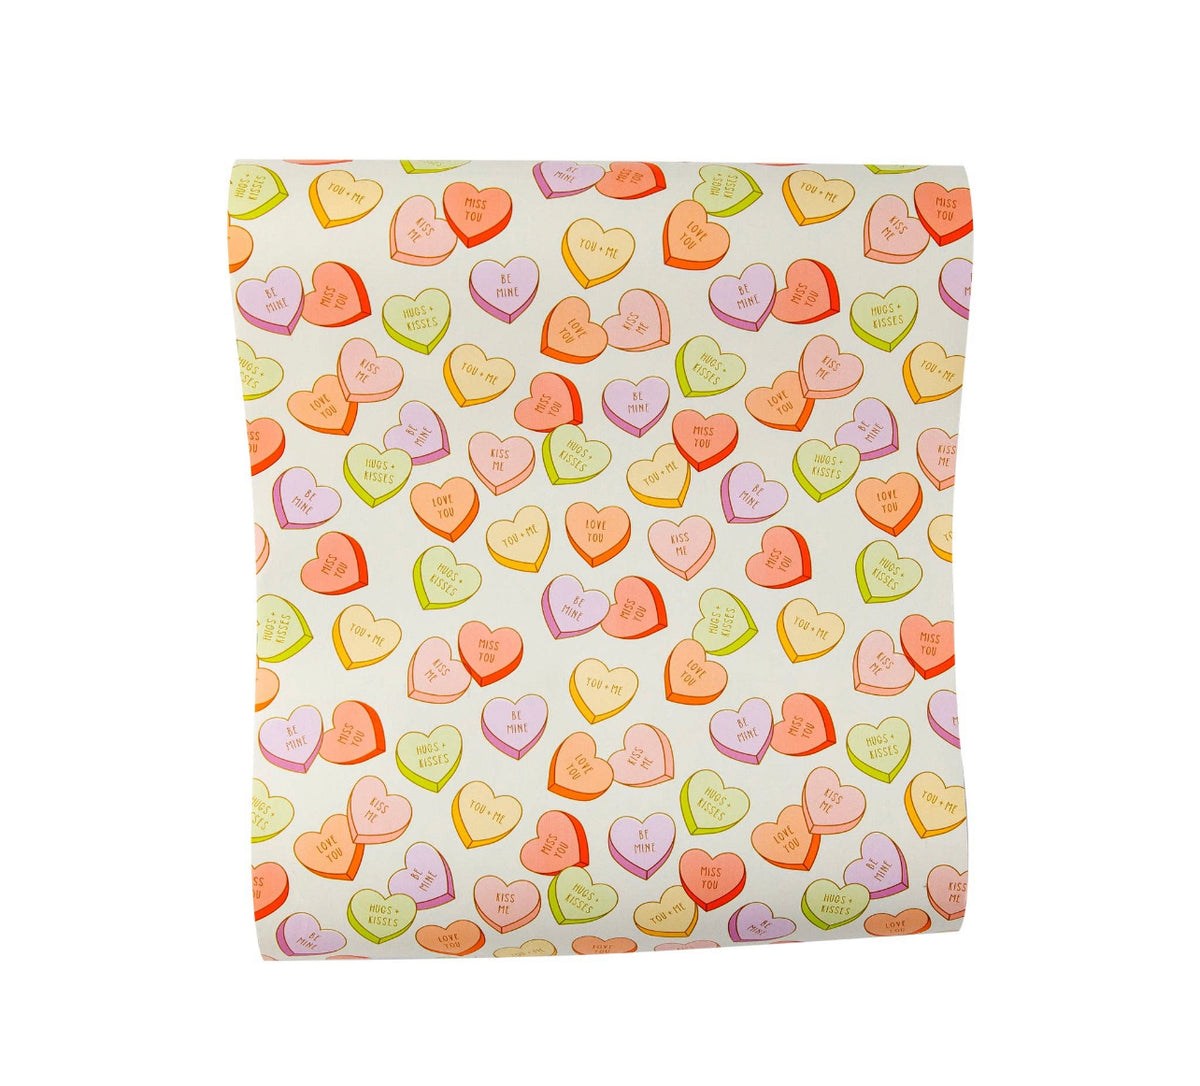 Conversation Hearts Paper Table Runner